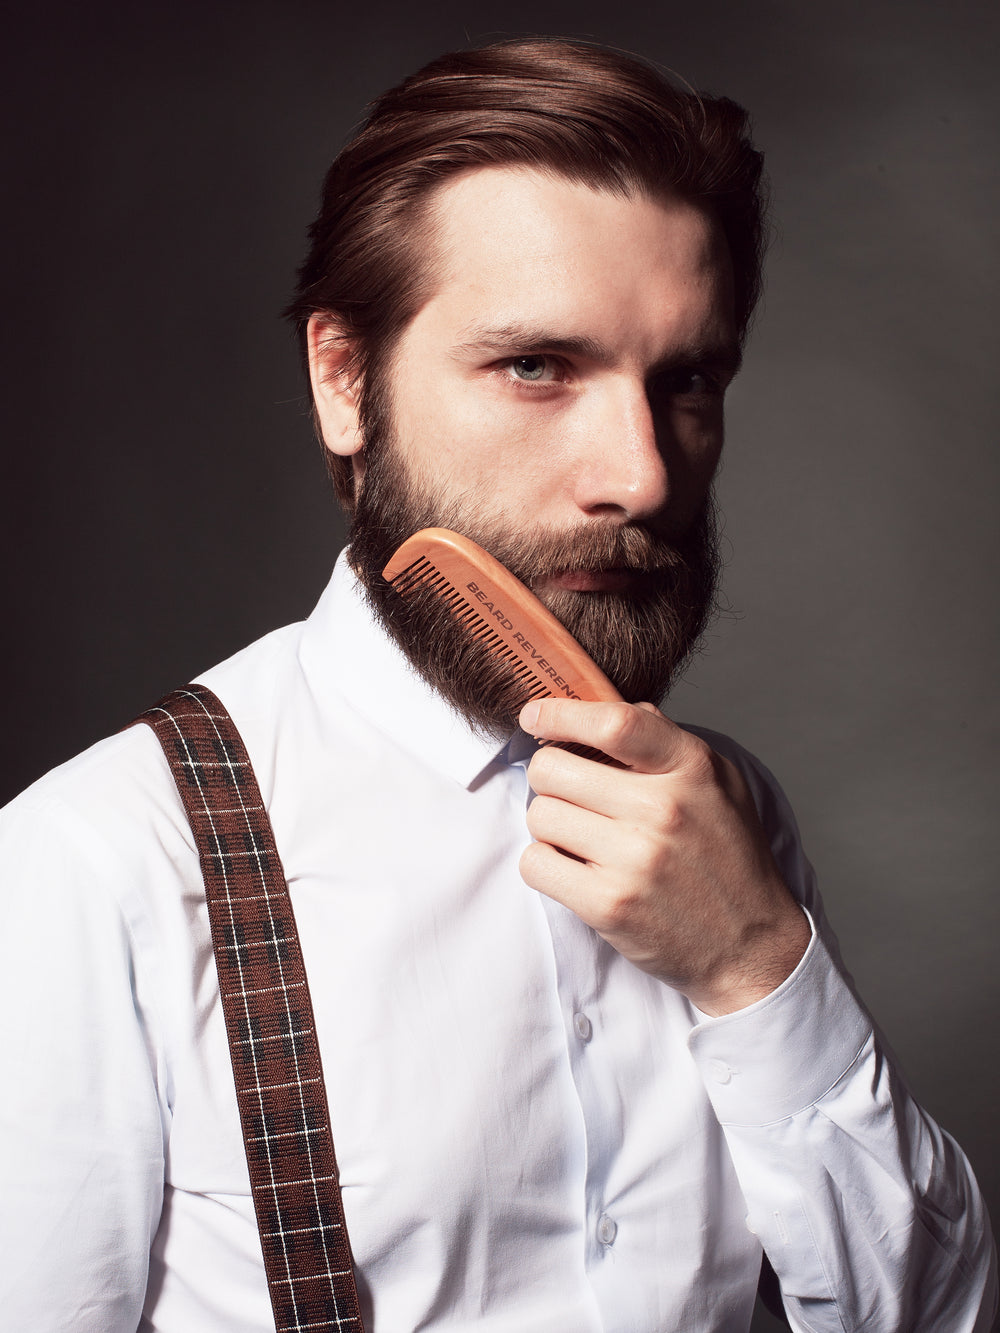 Beard Reverence beard comb being used by a well-dressed bearded man to comb his beard. 